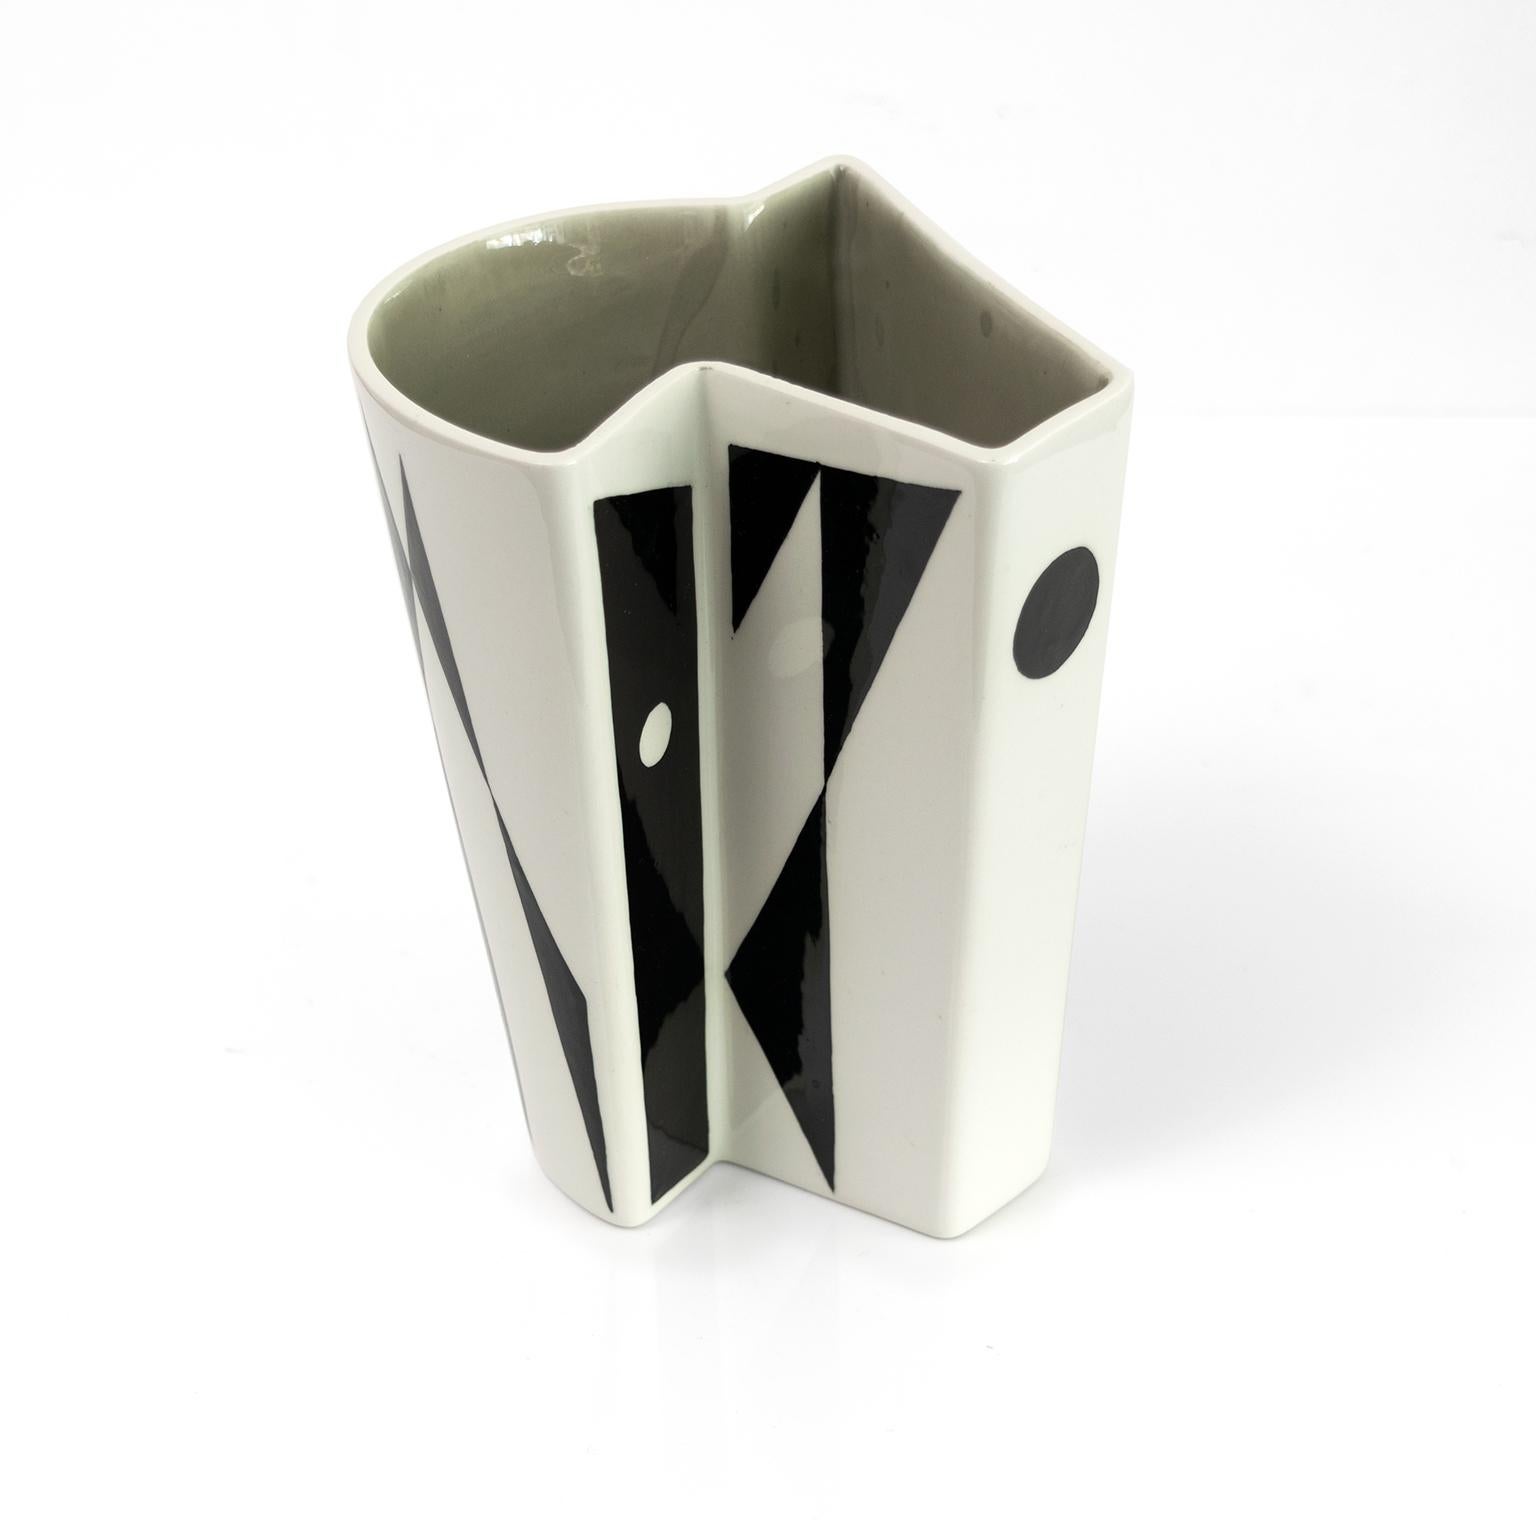 Carl-Harry Stalhane Geometric Bowl and Vase, Rorstrand, Sweden 1950 For Sale 1